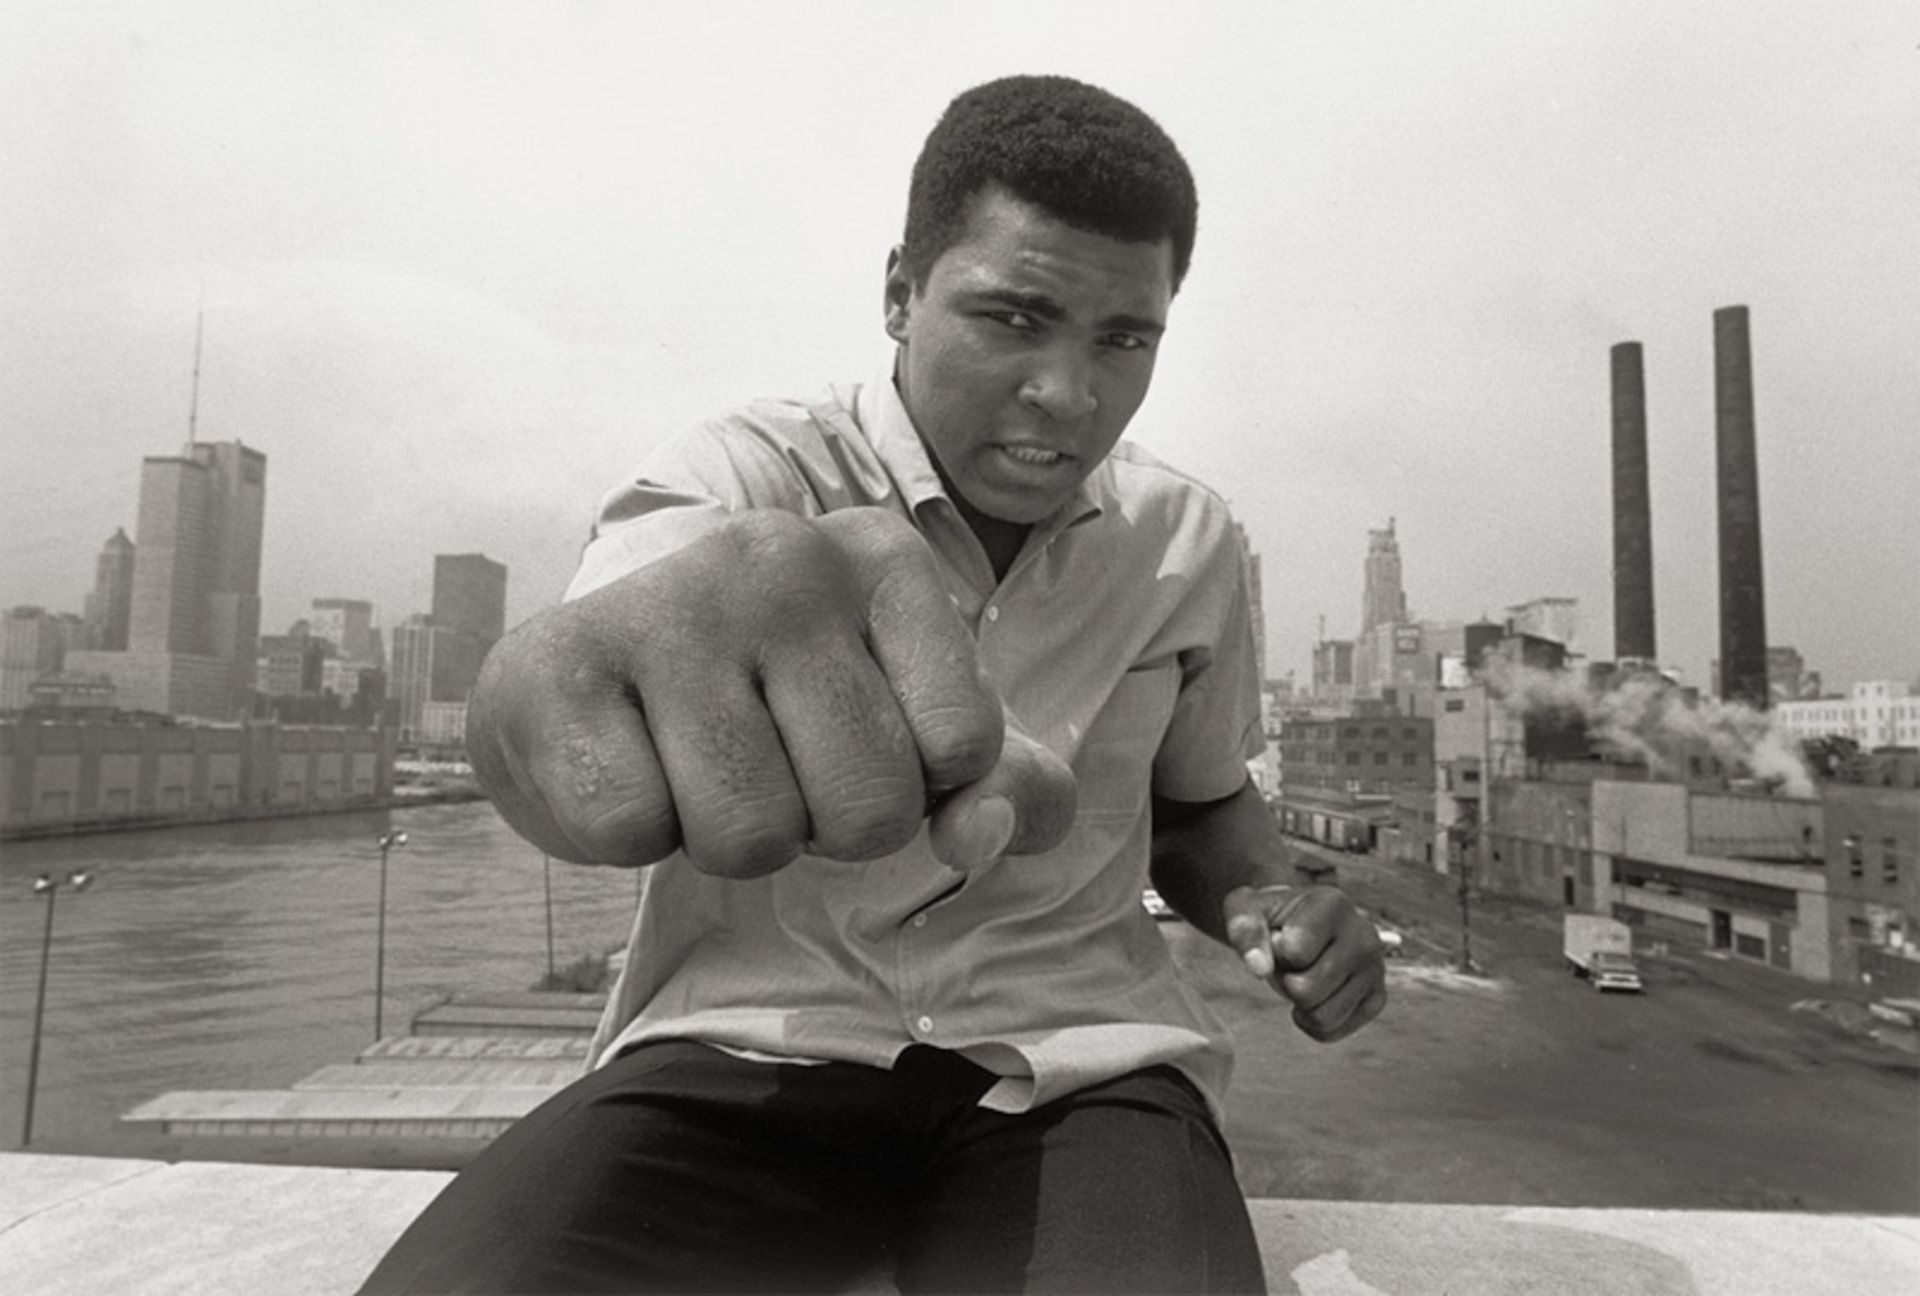 Hoepker, Thomas: Muhammad Ali in front of the Skyline of Chicago